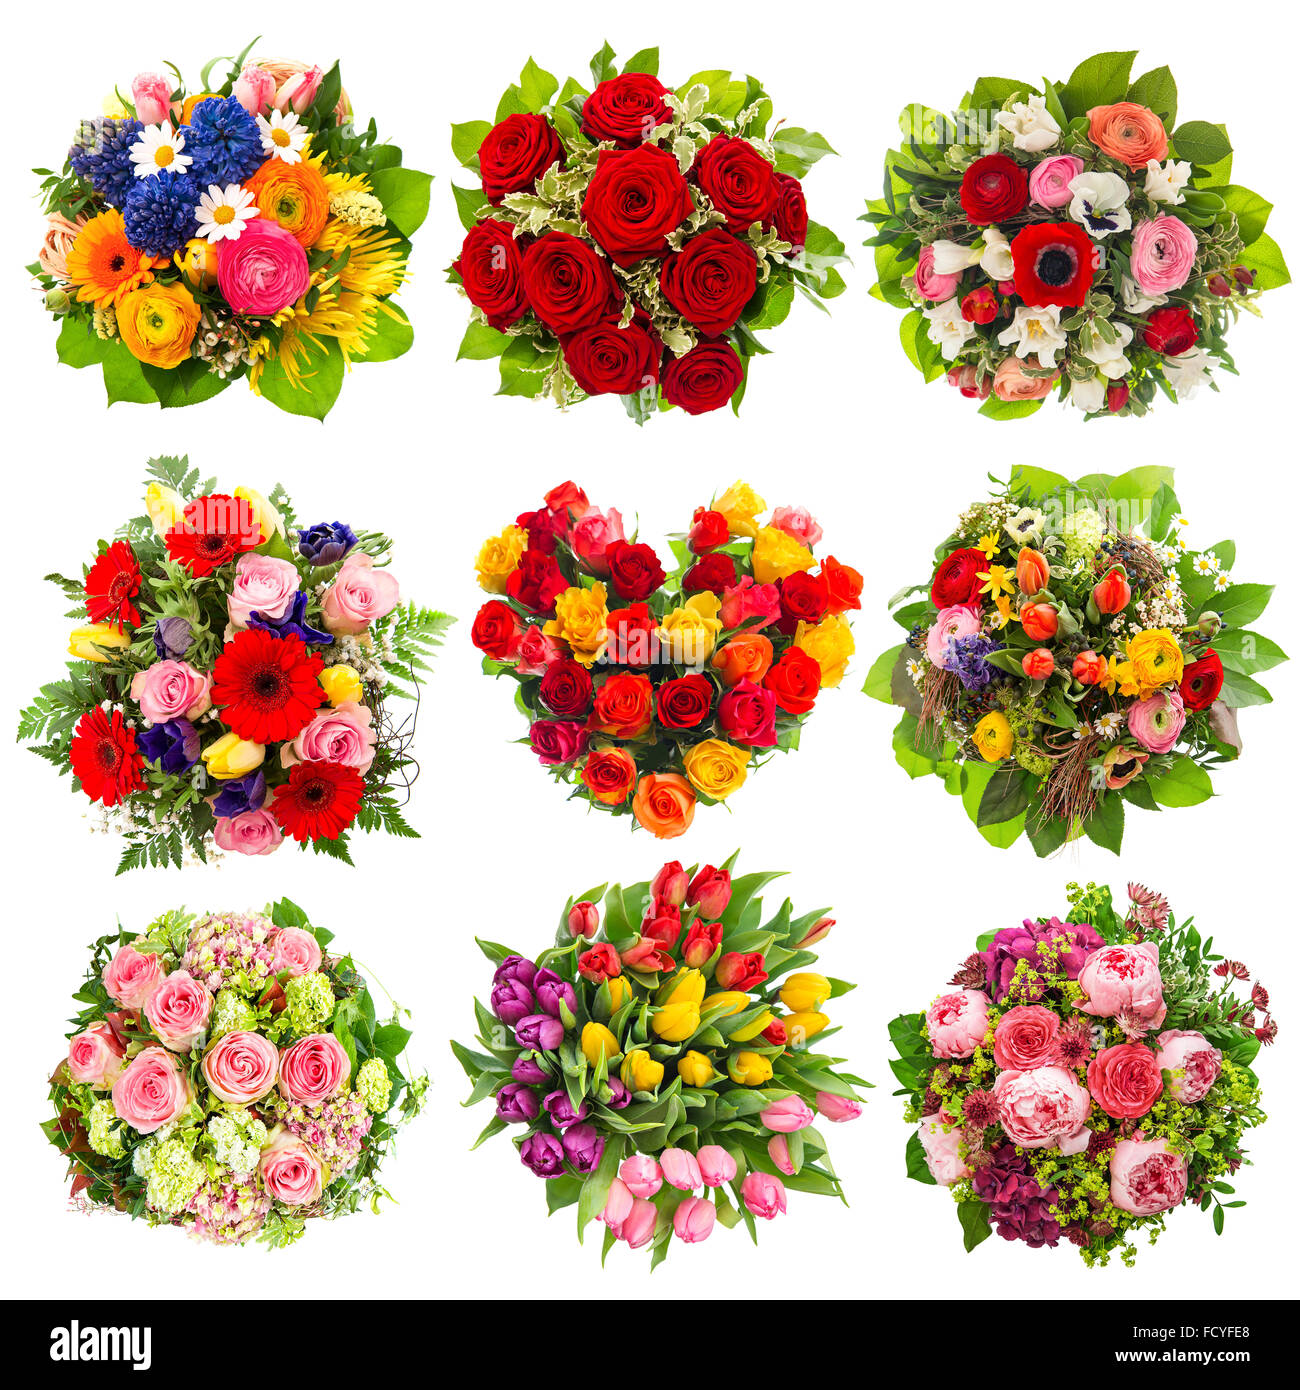 Flowers bouquet for Holidays Birthday, Wedding, Mother's Day, Easter, Valentines Day, Roses, Tulips, Peony Stock Photo